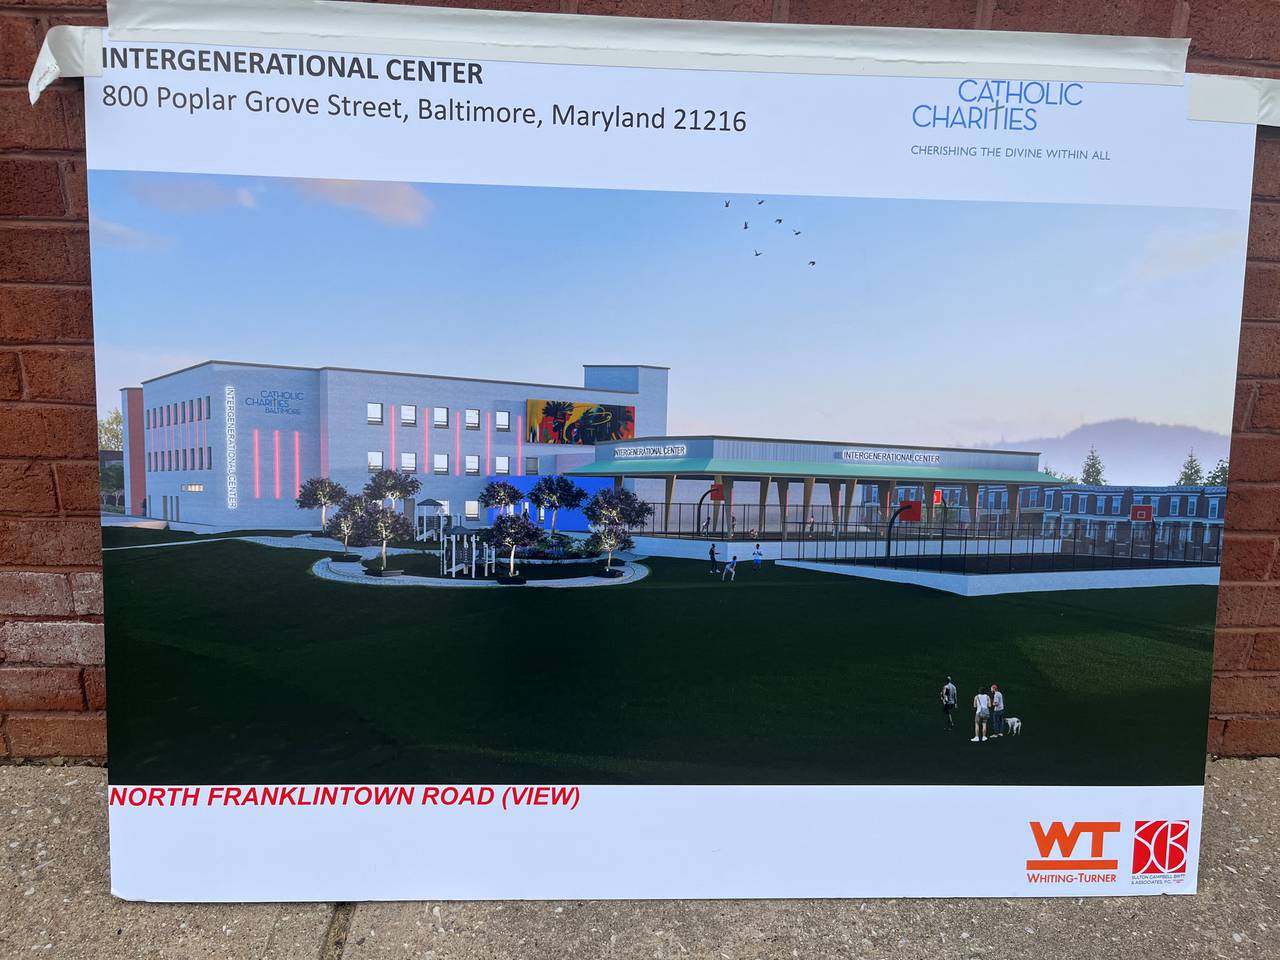 An Intergenerational Center designed for West Baltimore is expected to have amenities and programs that serve toddlers, adults and senior citizens.